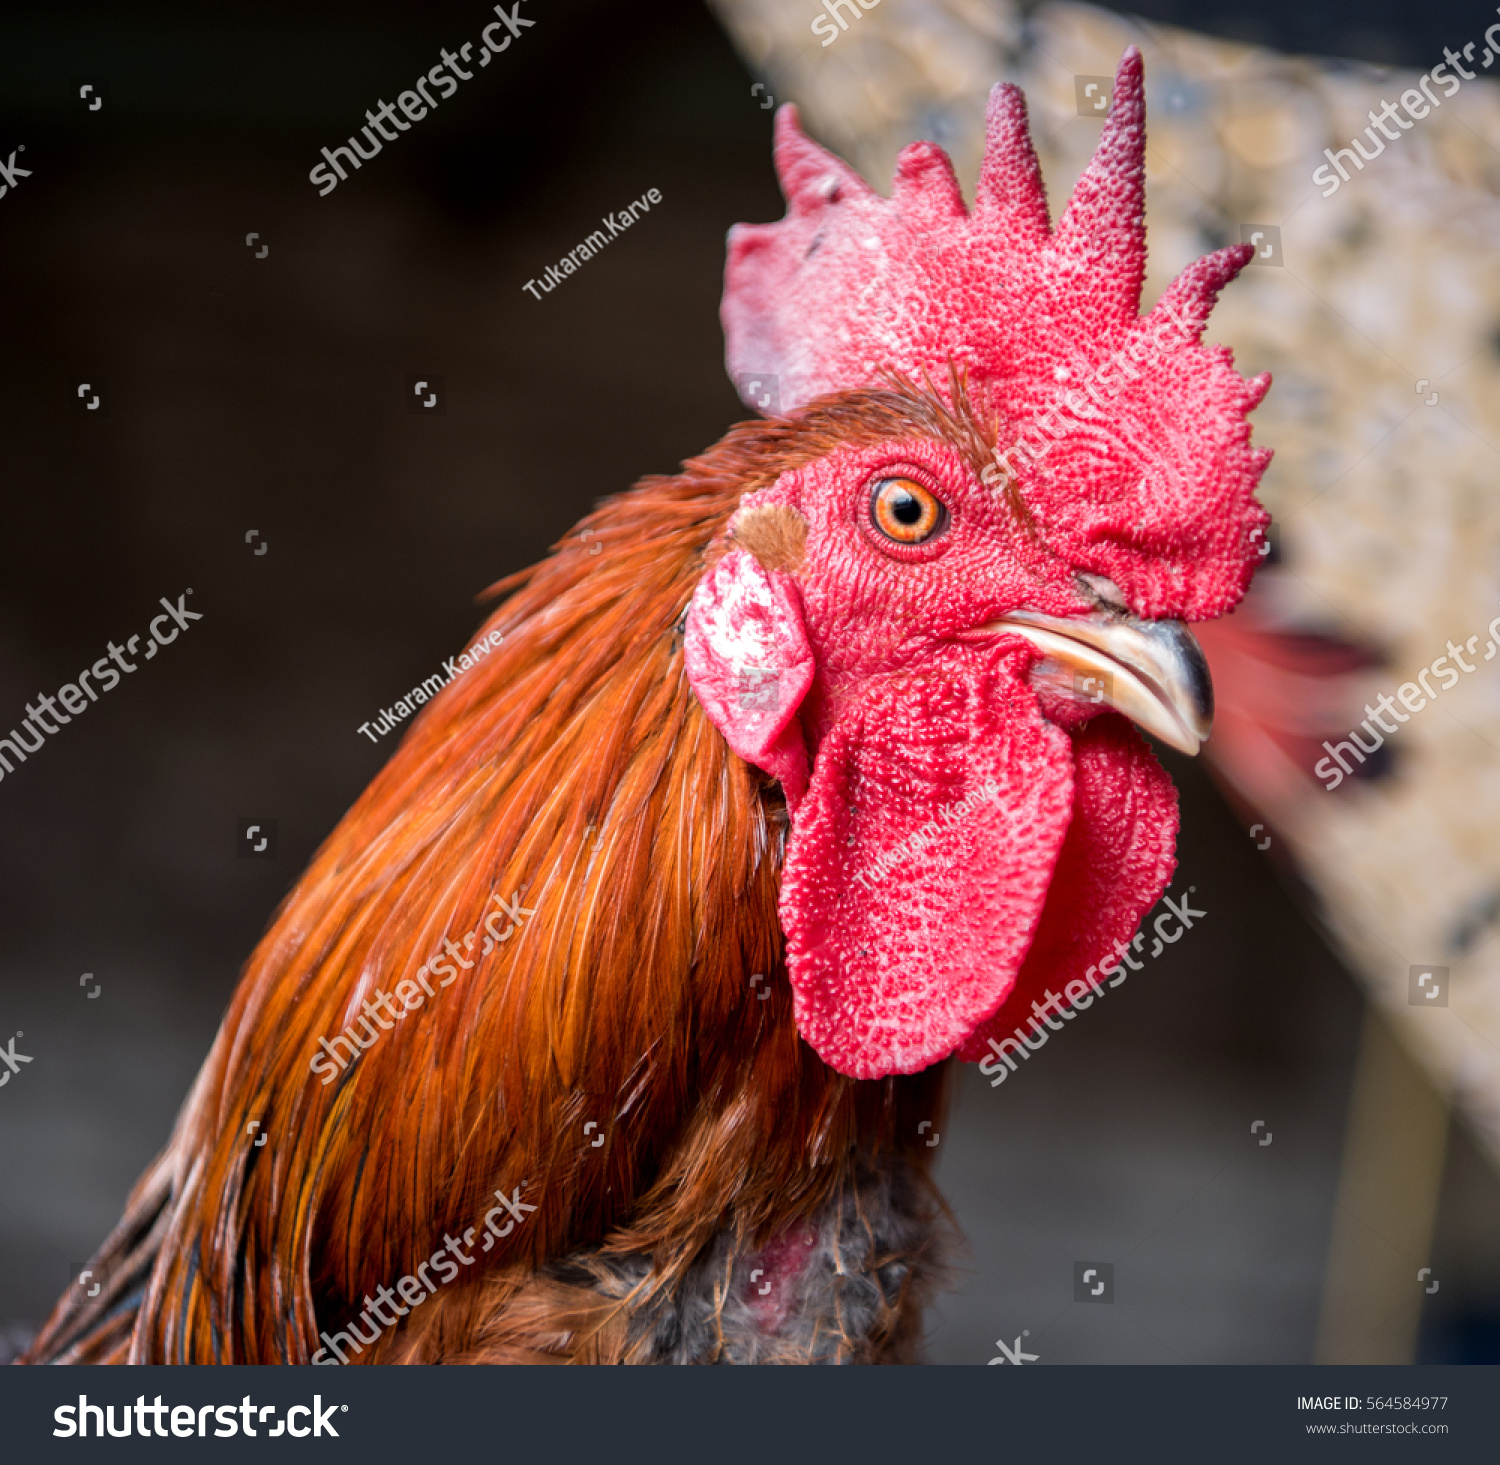 Red Rooster Closeup Poultry Farm Rural Stock Photo 564584977 ...